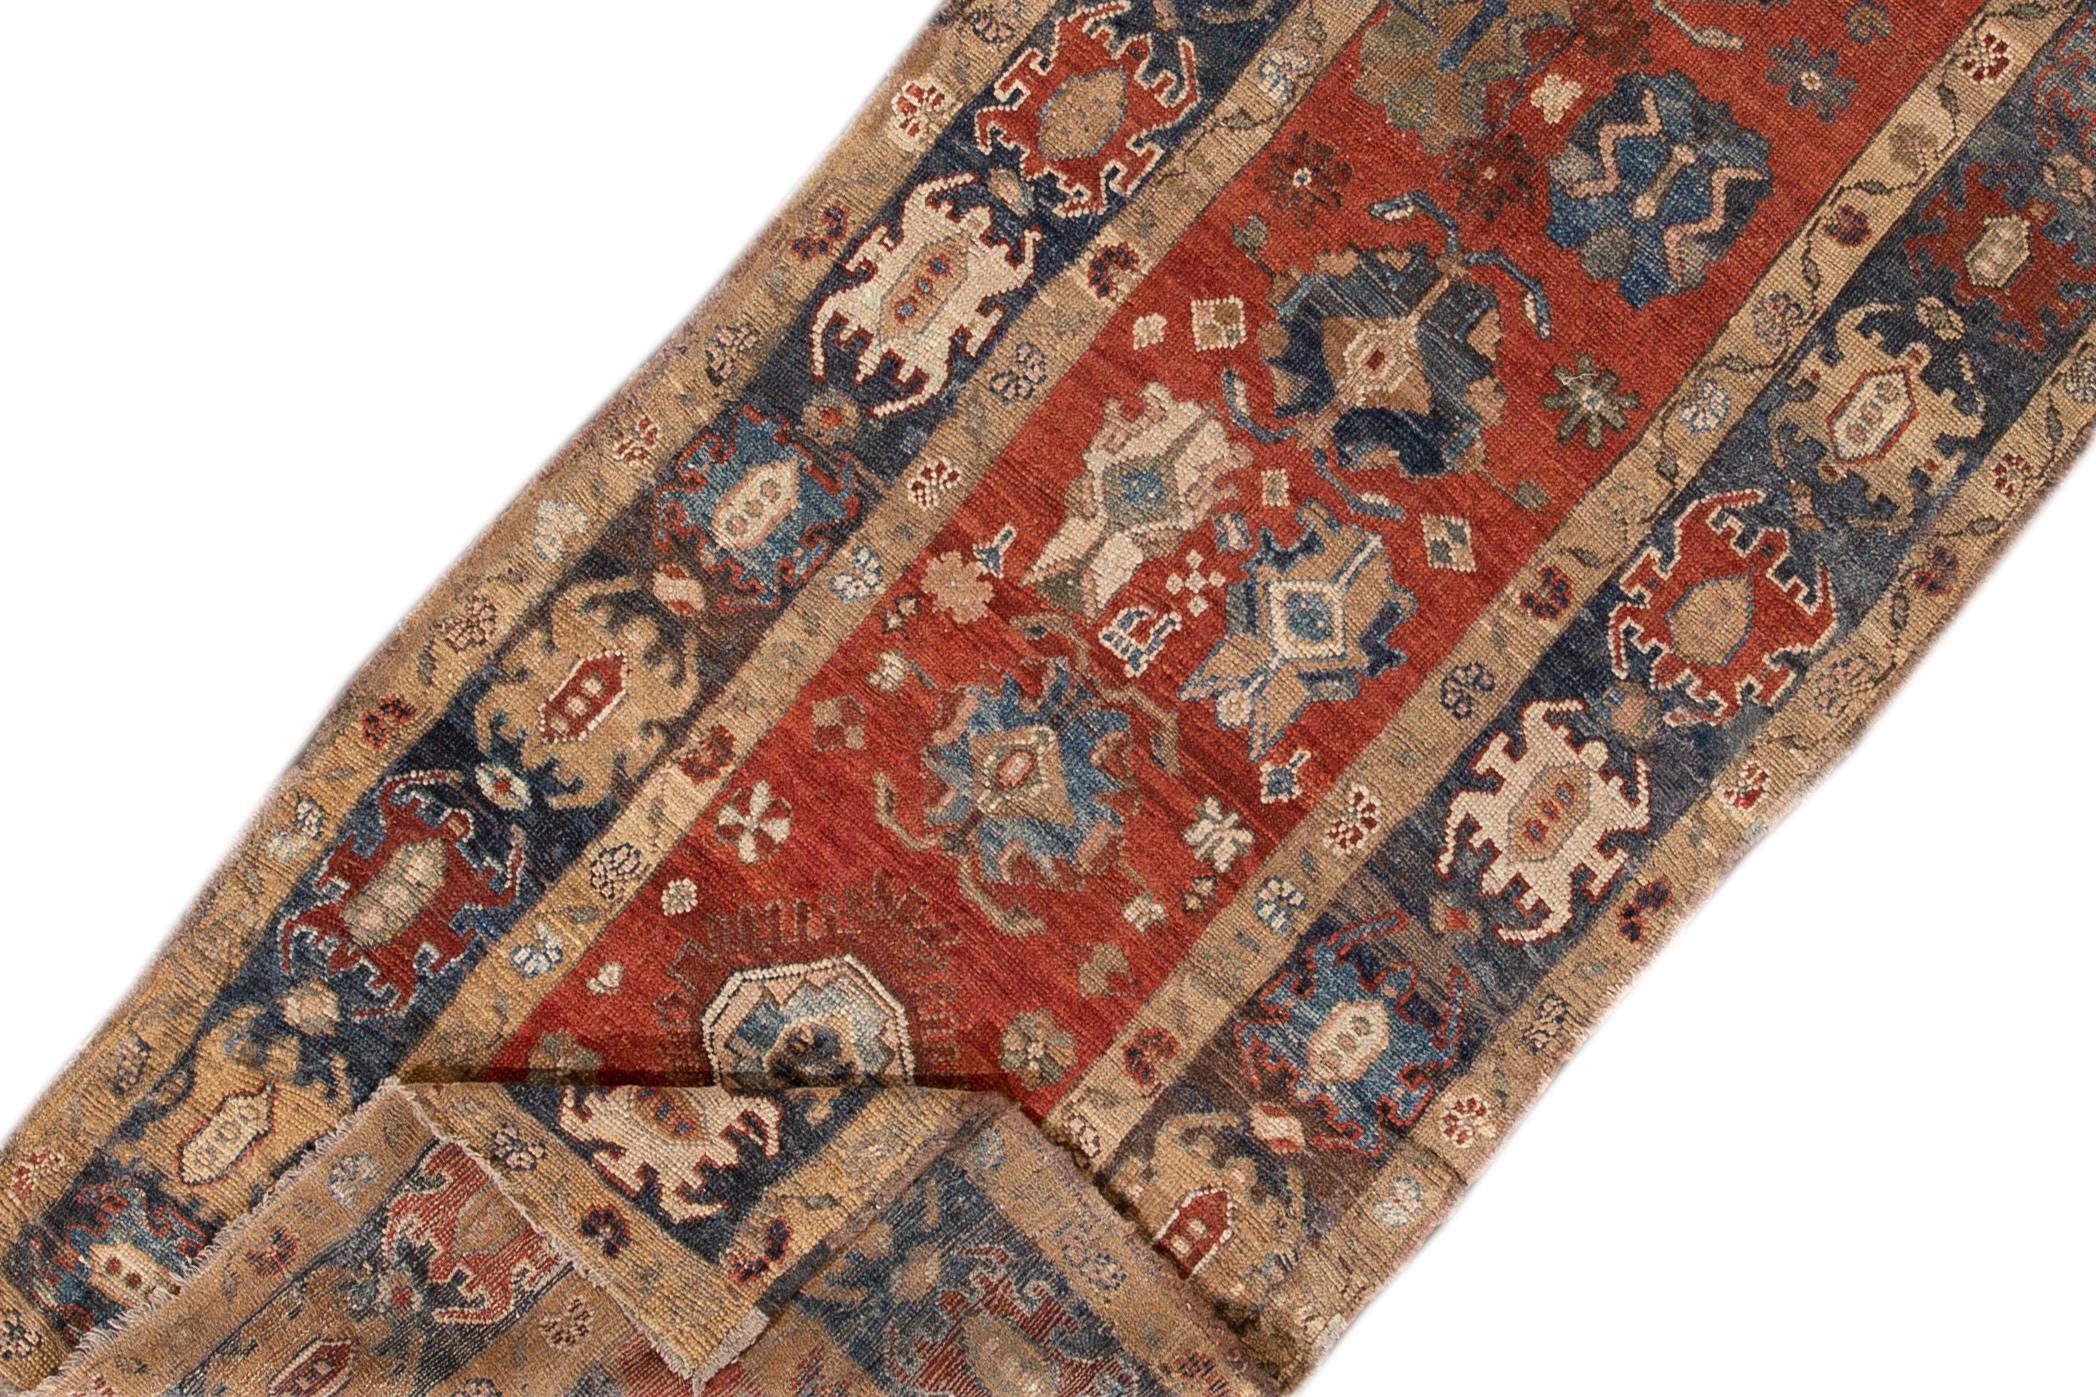 Beautiful vintage Heriz wool runner with a red field, the fame of navy-blue. This rug has multi-color accents in an all-over geometric design.

This rug measures 3' 7